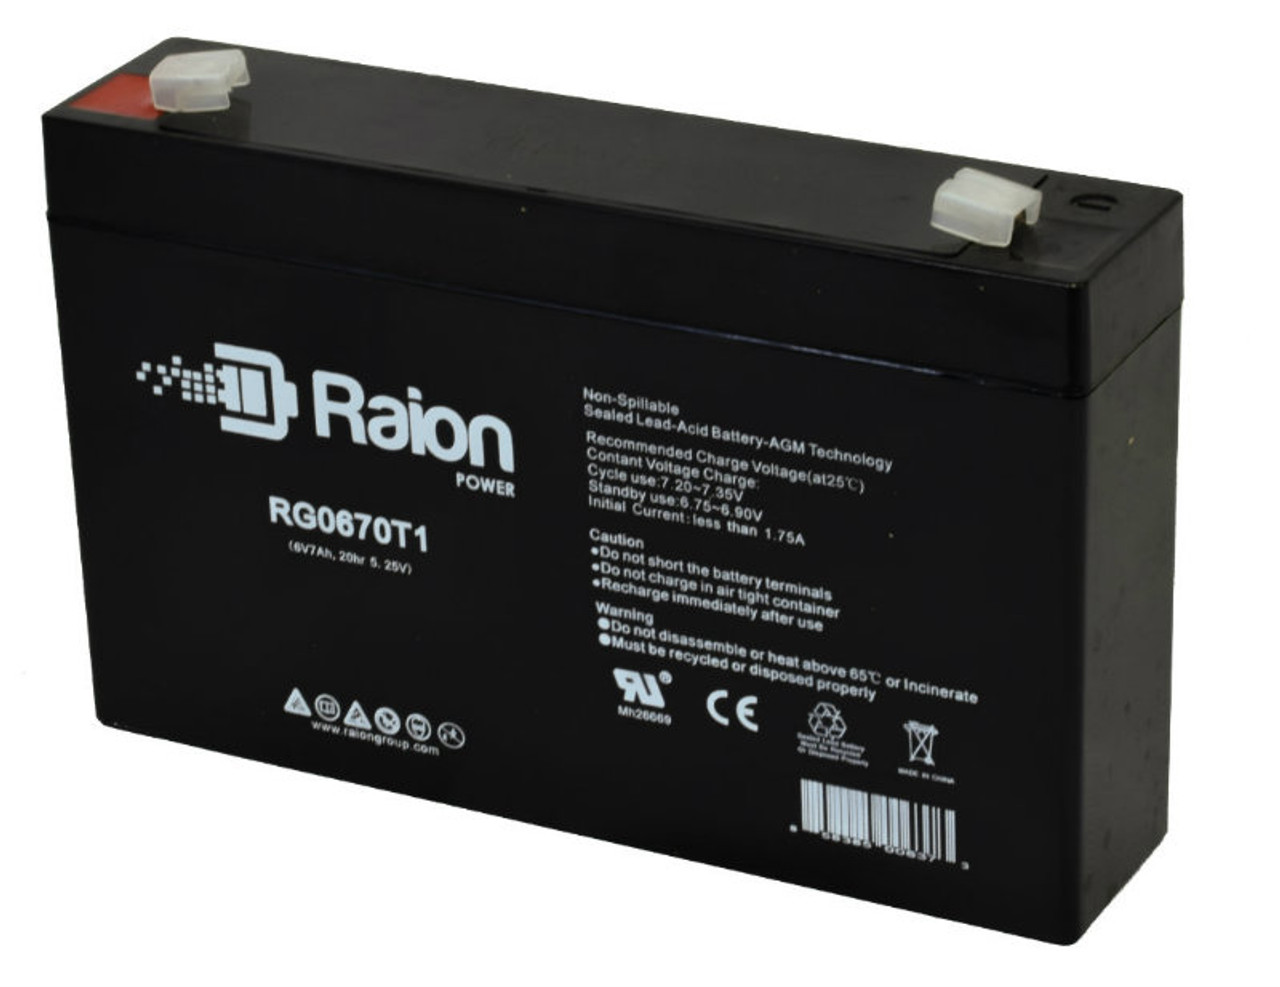 Raion Power RG0670T1 6V 7Ah Replacement Emergency Lighting Battery for Sure-Lites AA2